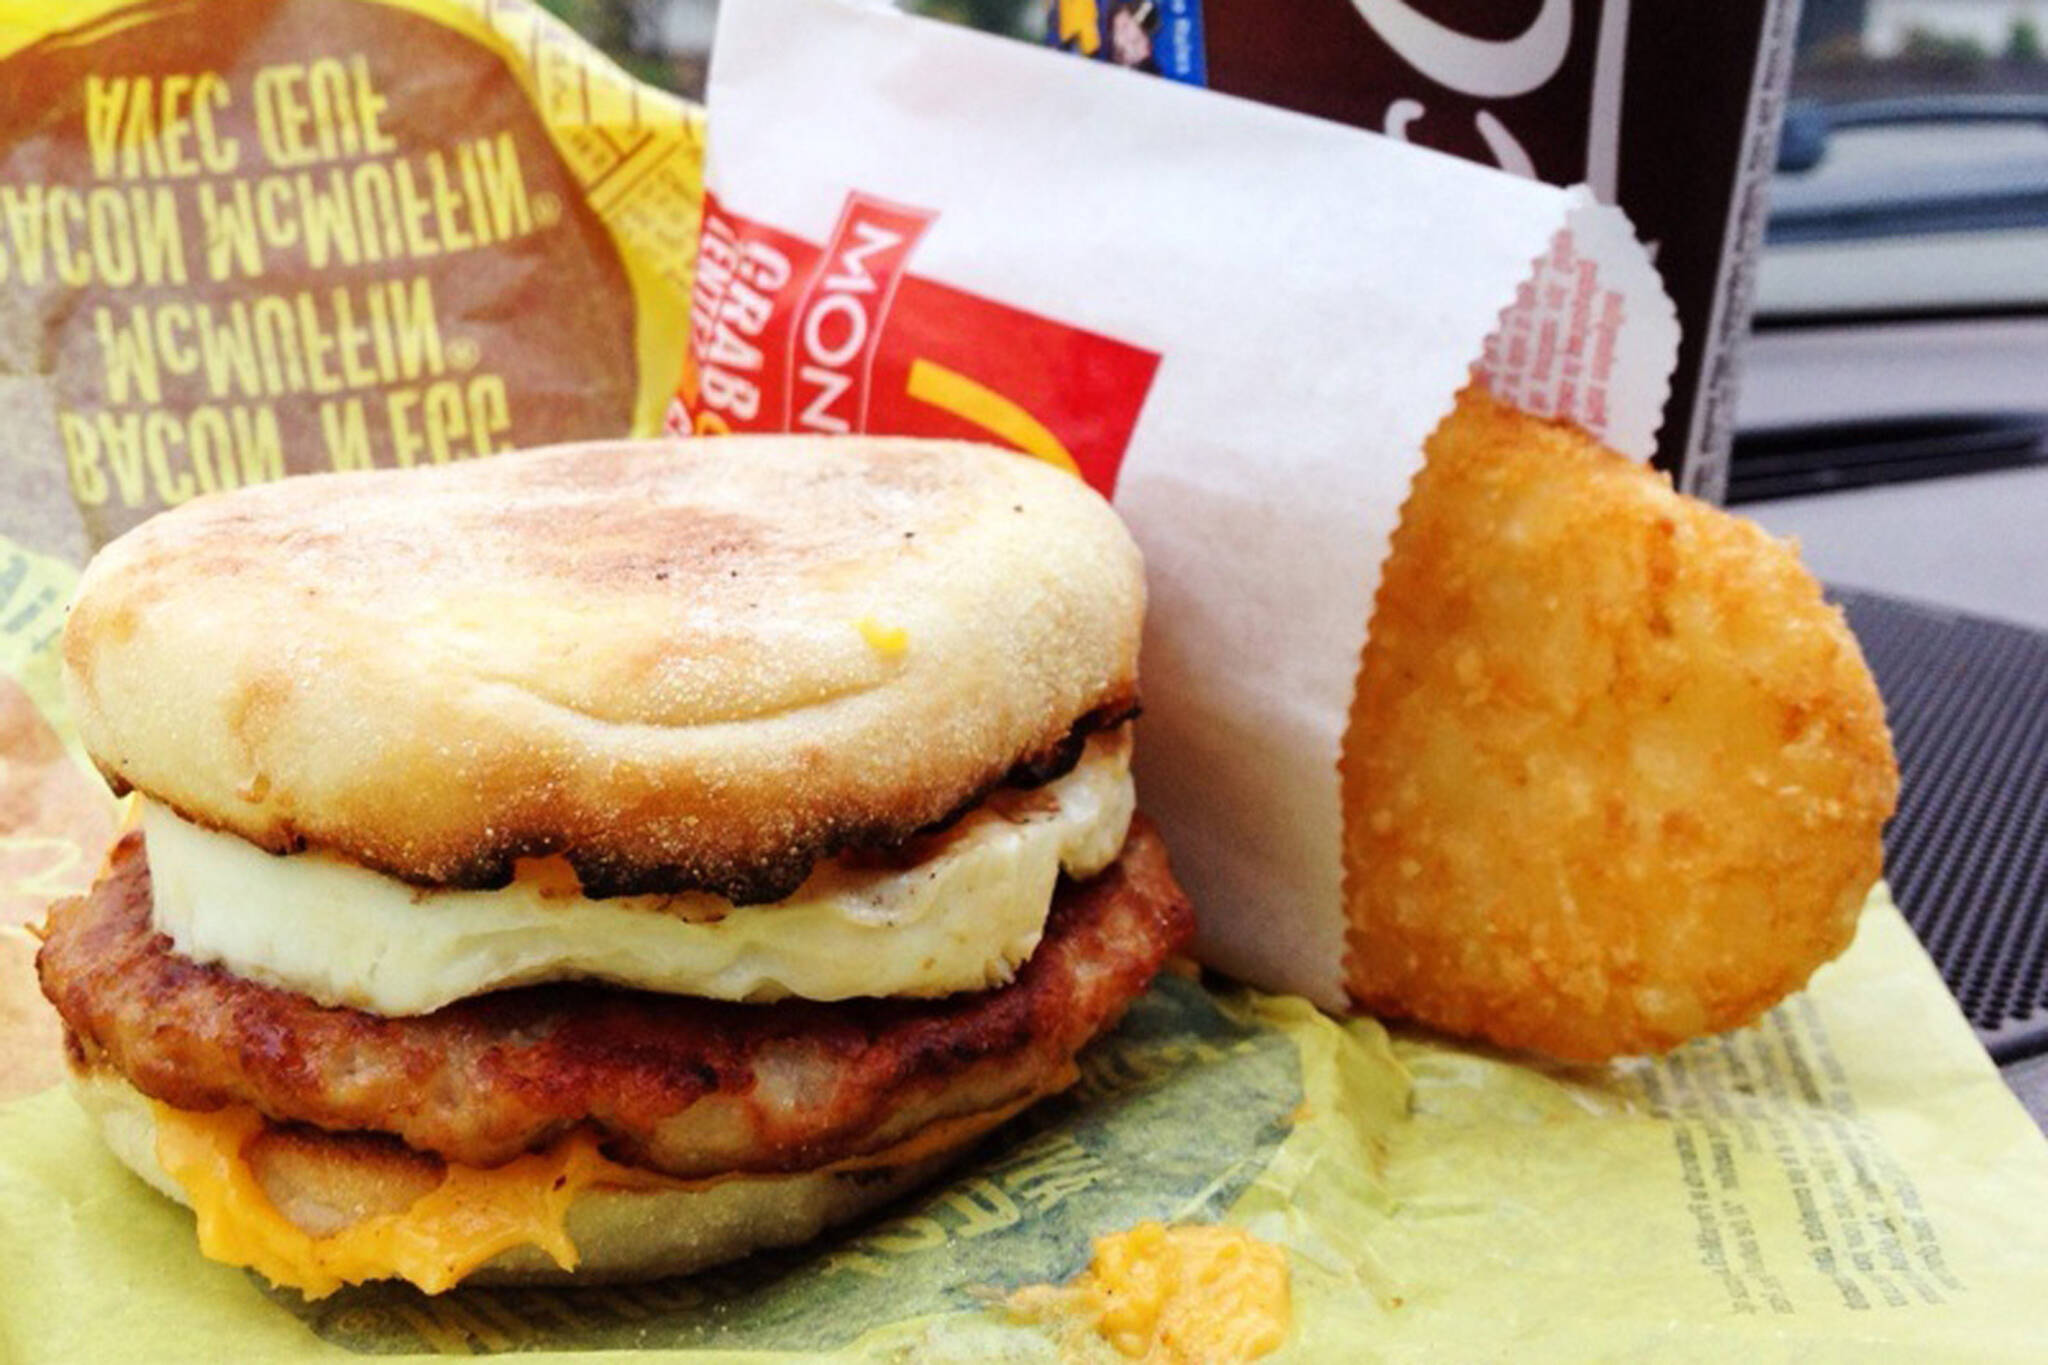 McDonald's allday breakfast launches in Toronto today